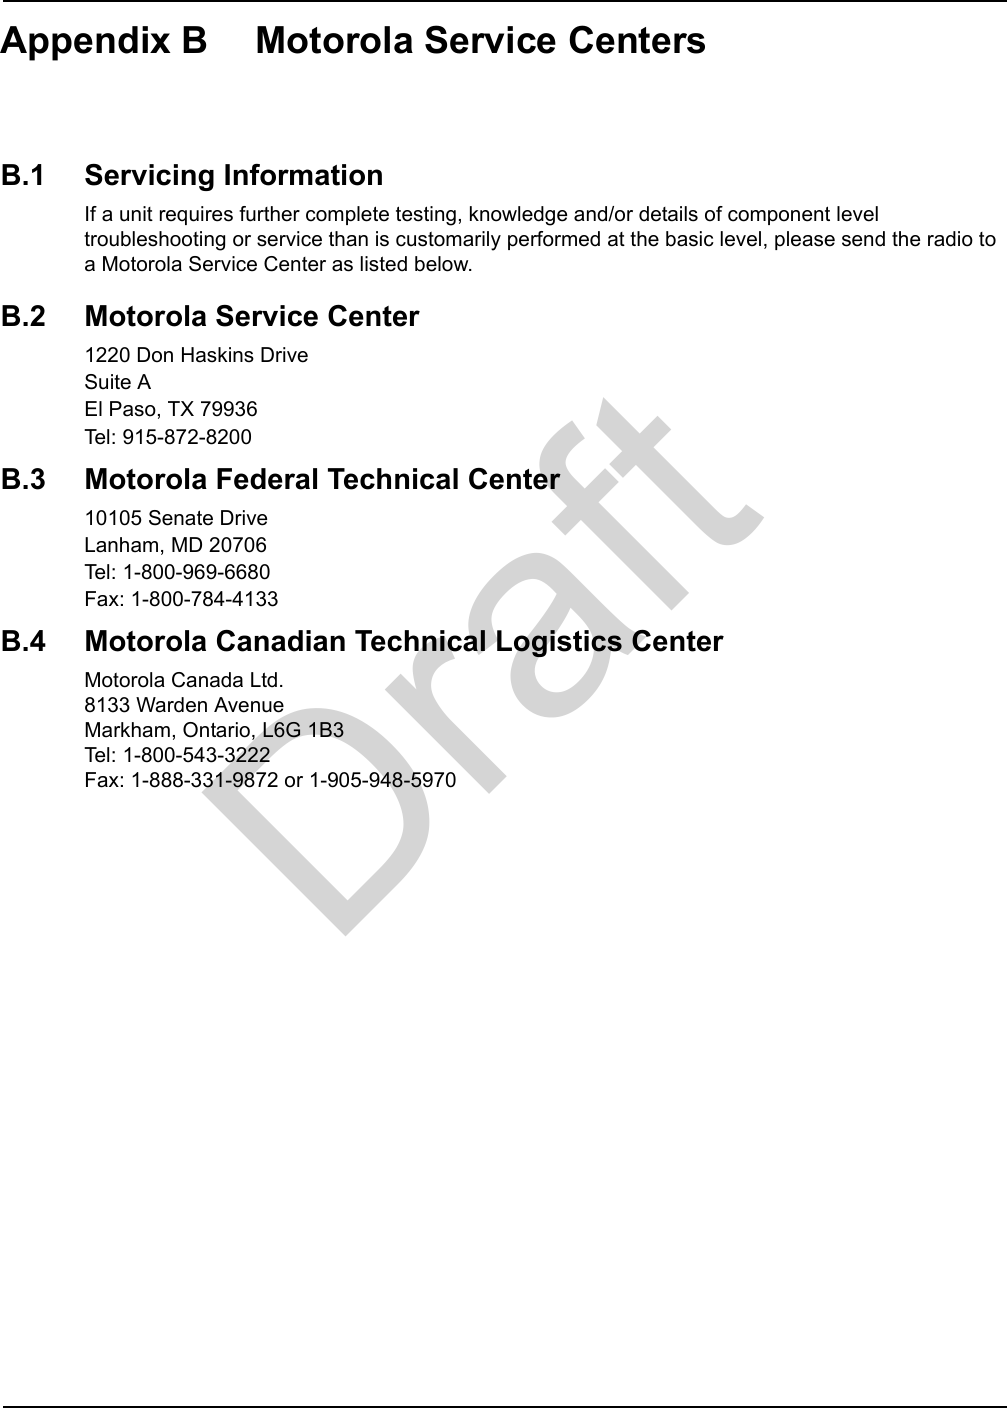 DraftAppendix B Motorola Service CentersB.1 Servicing InformationIf a unit requires further complete testing, knowledge and/or details of component level troubleshooting or service than is customarily performed at the basic level, please send the radio to a Motorola Service Center as listed below.B.2 Motorola Service Center1220 Don Haskins DriveSuite AEl Paso, TX 79936Tel: 915-872-8200B.3 Motorola Federal Technical Center10105 Senate DriveLanham, MD 20706Tel: 1-800-969-6680Fax: 1-800-784-4133B.4 Motorola Canadian Technical Logistics CenterMotorola Canada Ltd. 8133 Warden Avenue Markham, Ontario, L6G 1B3 Tel: 1-800-543-3222 Fax: 1-888-331-9872 or 1-905-948-5970